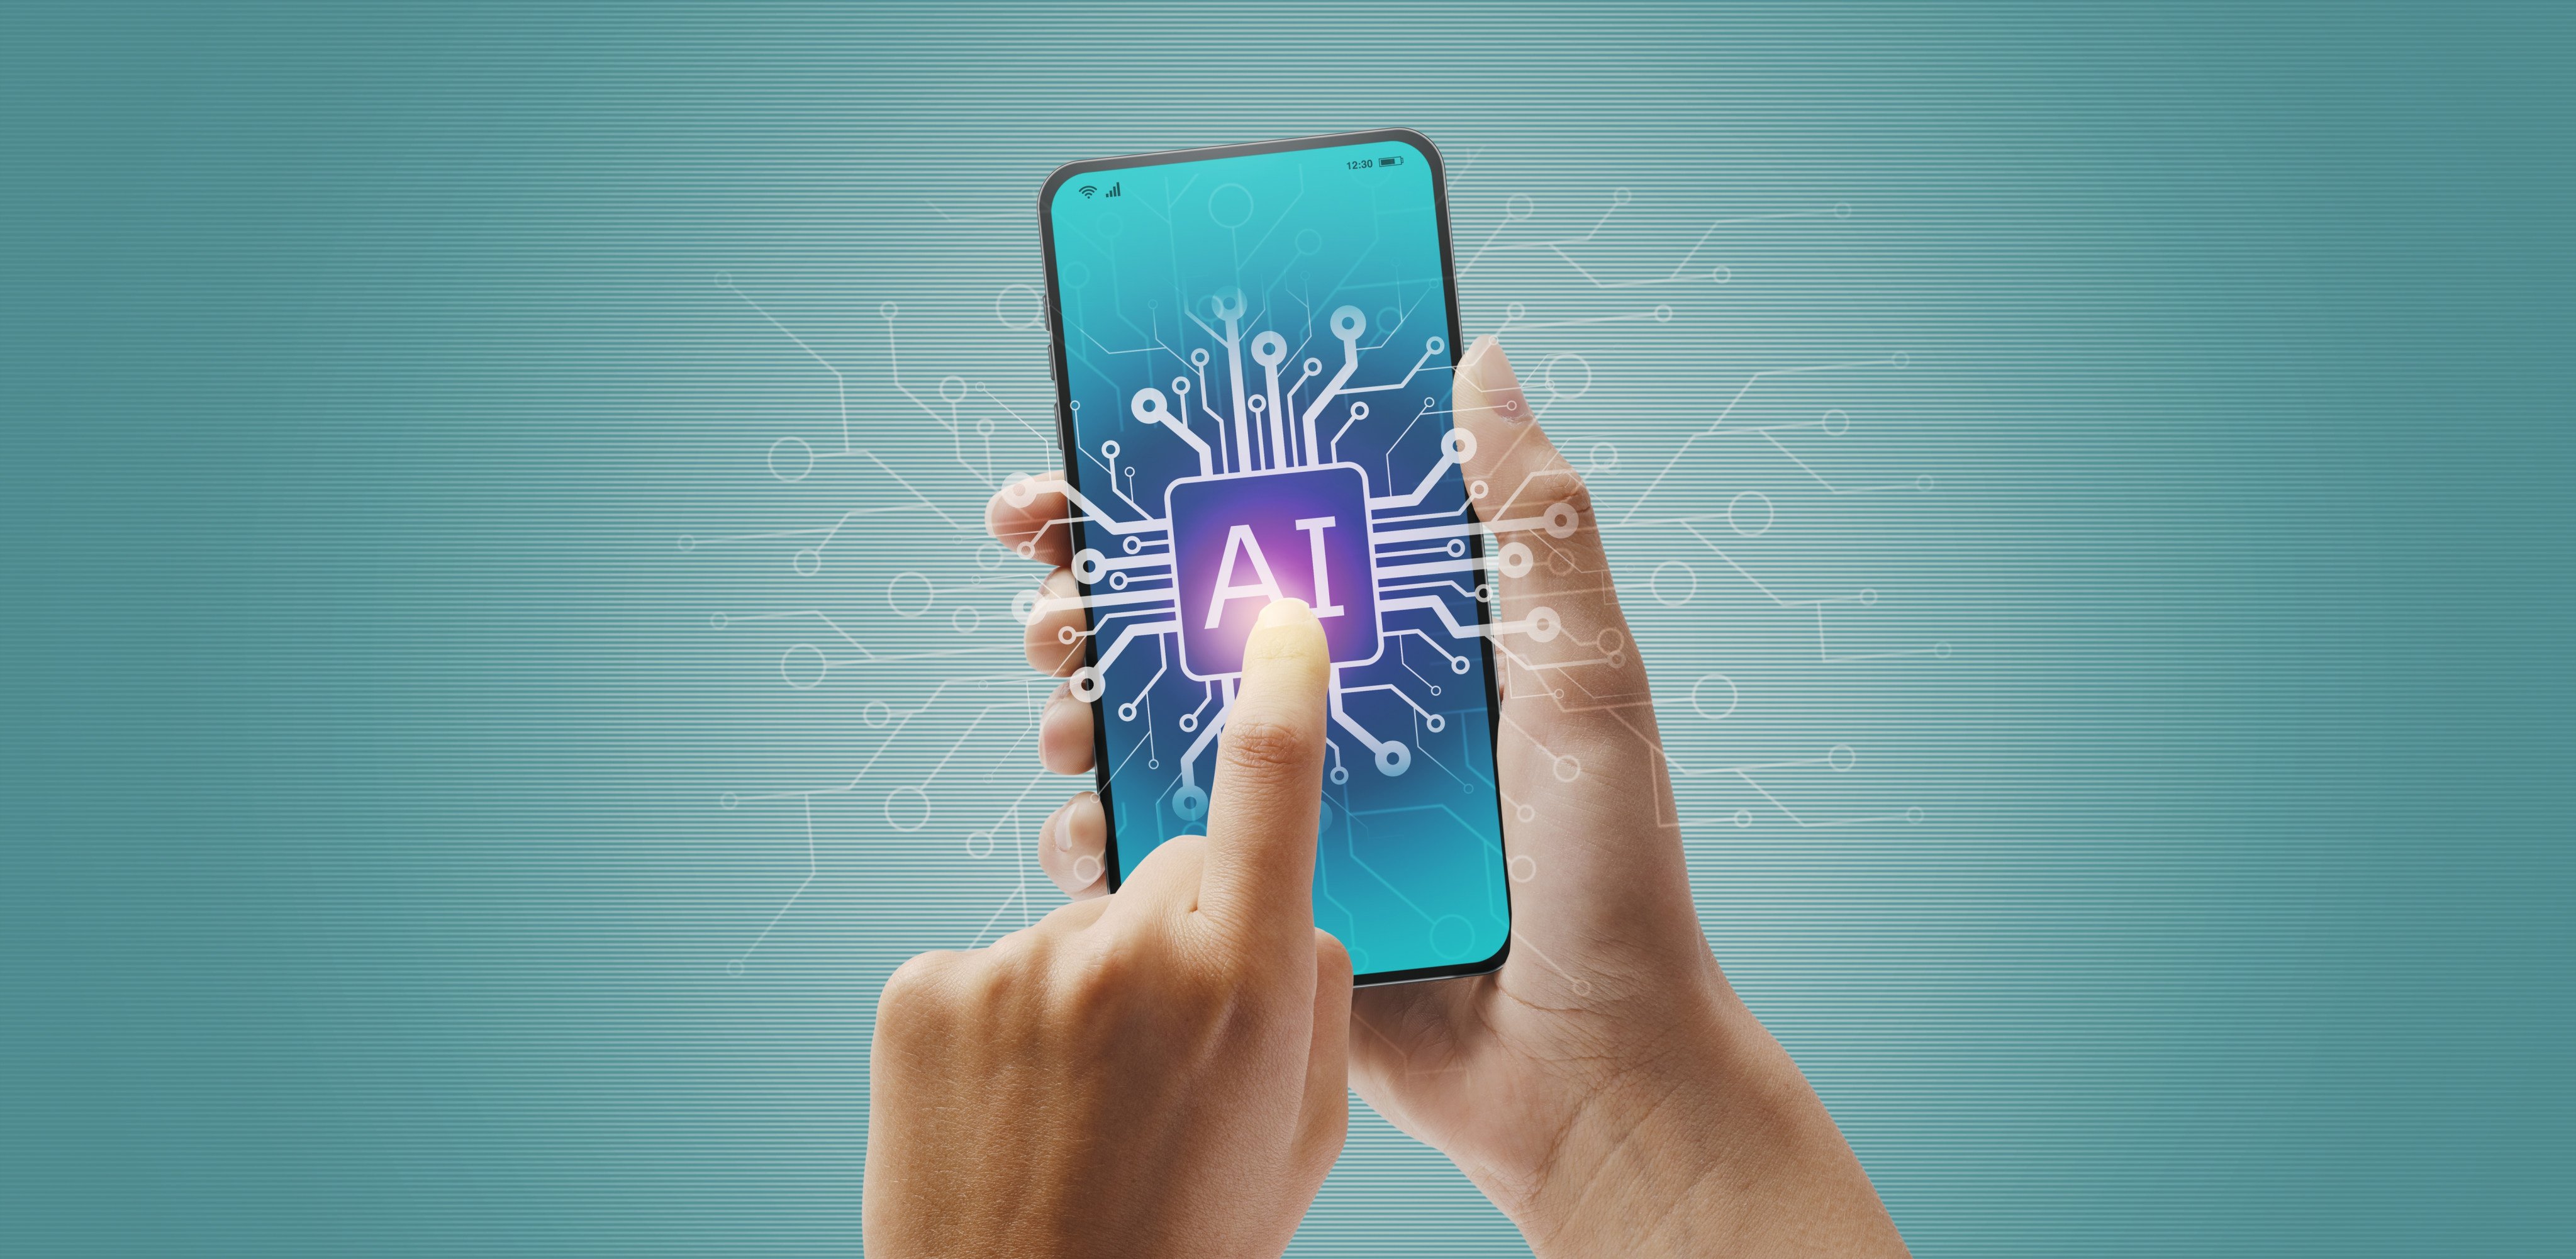 AI can help companies work more efficiently, cutting down on time which can be put towards tasks such as offering better quality customer experiences, says Xie. Photo: Shutterstock